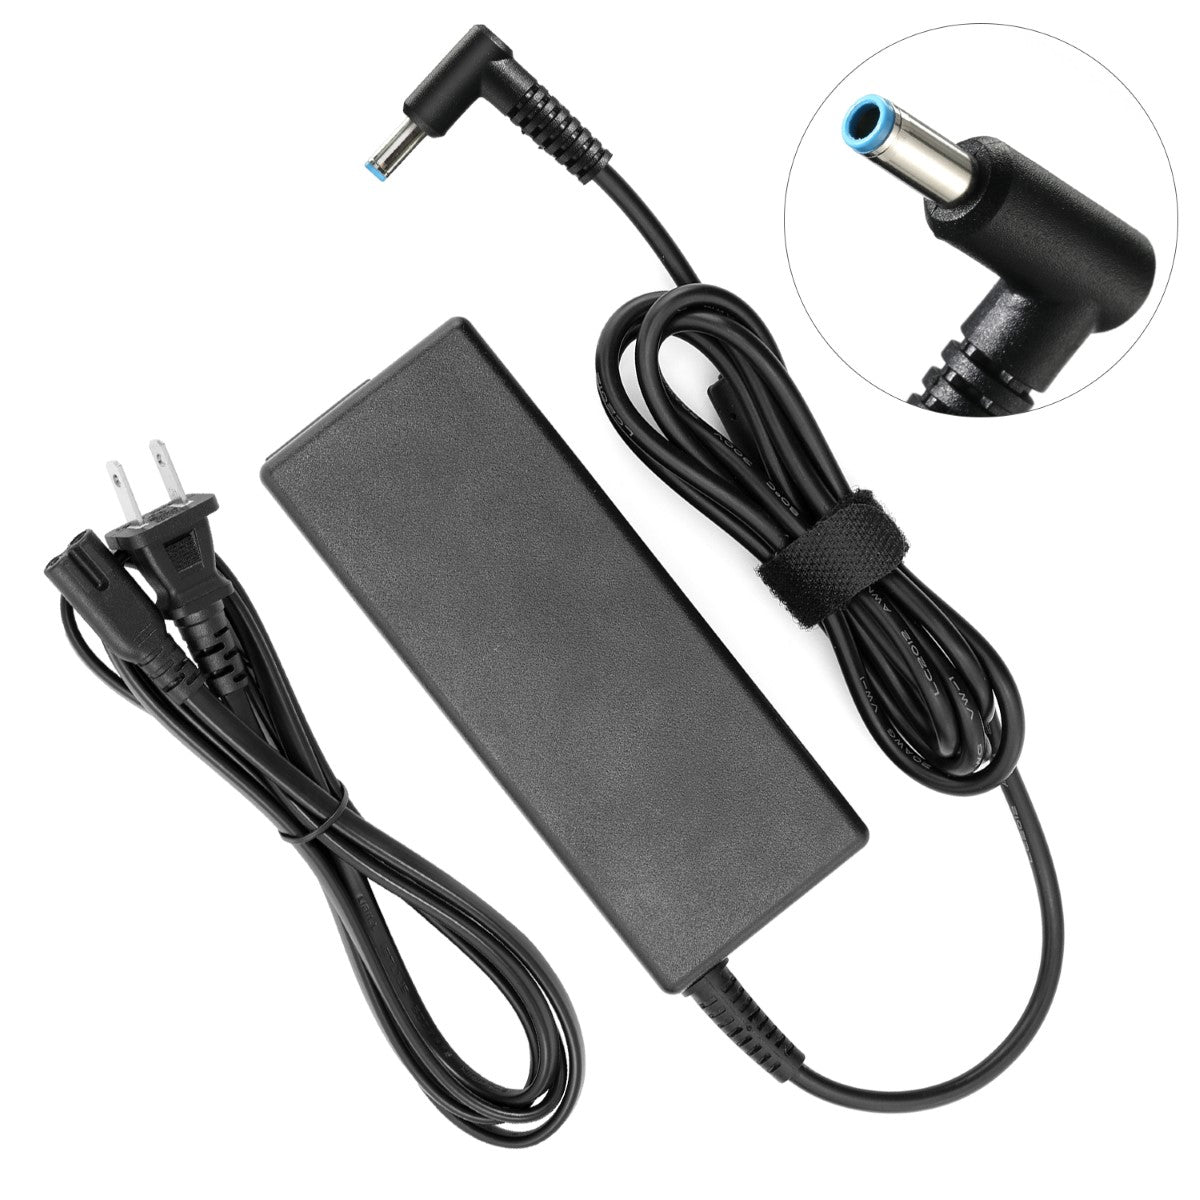 AC Adapter Charger for HP Pavilion 13-p117cl x2 Notebook.